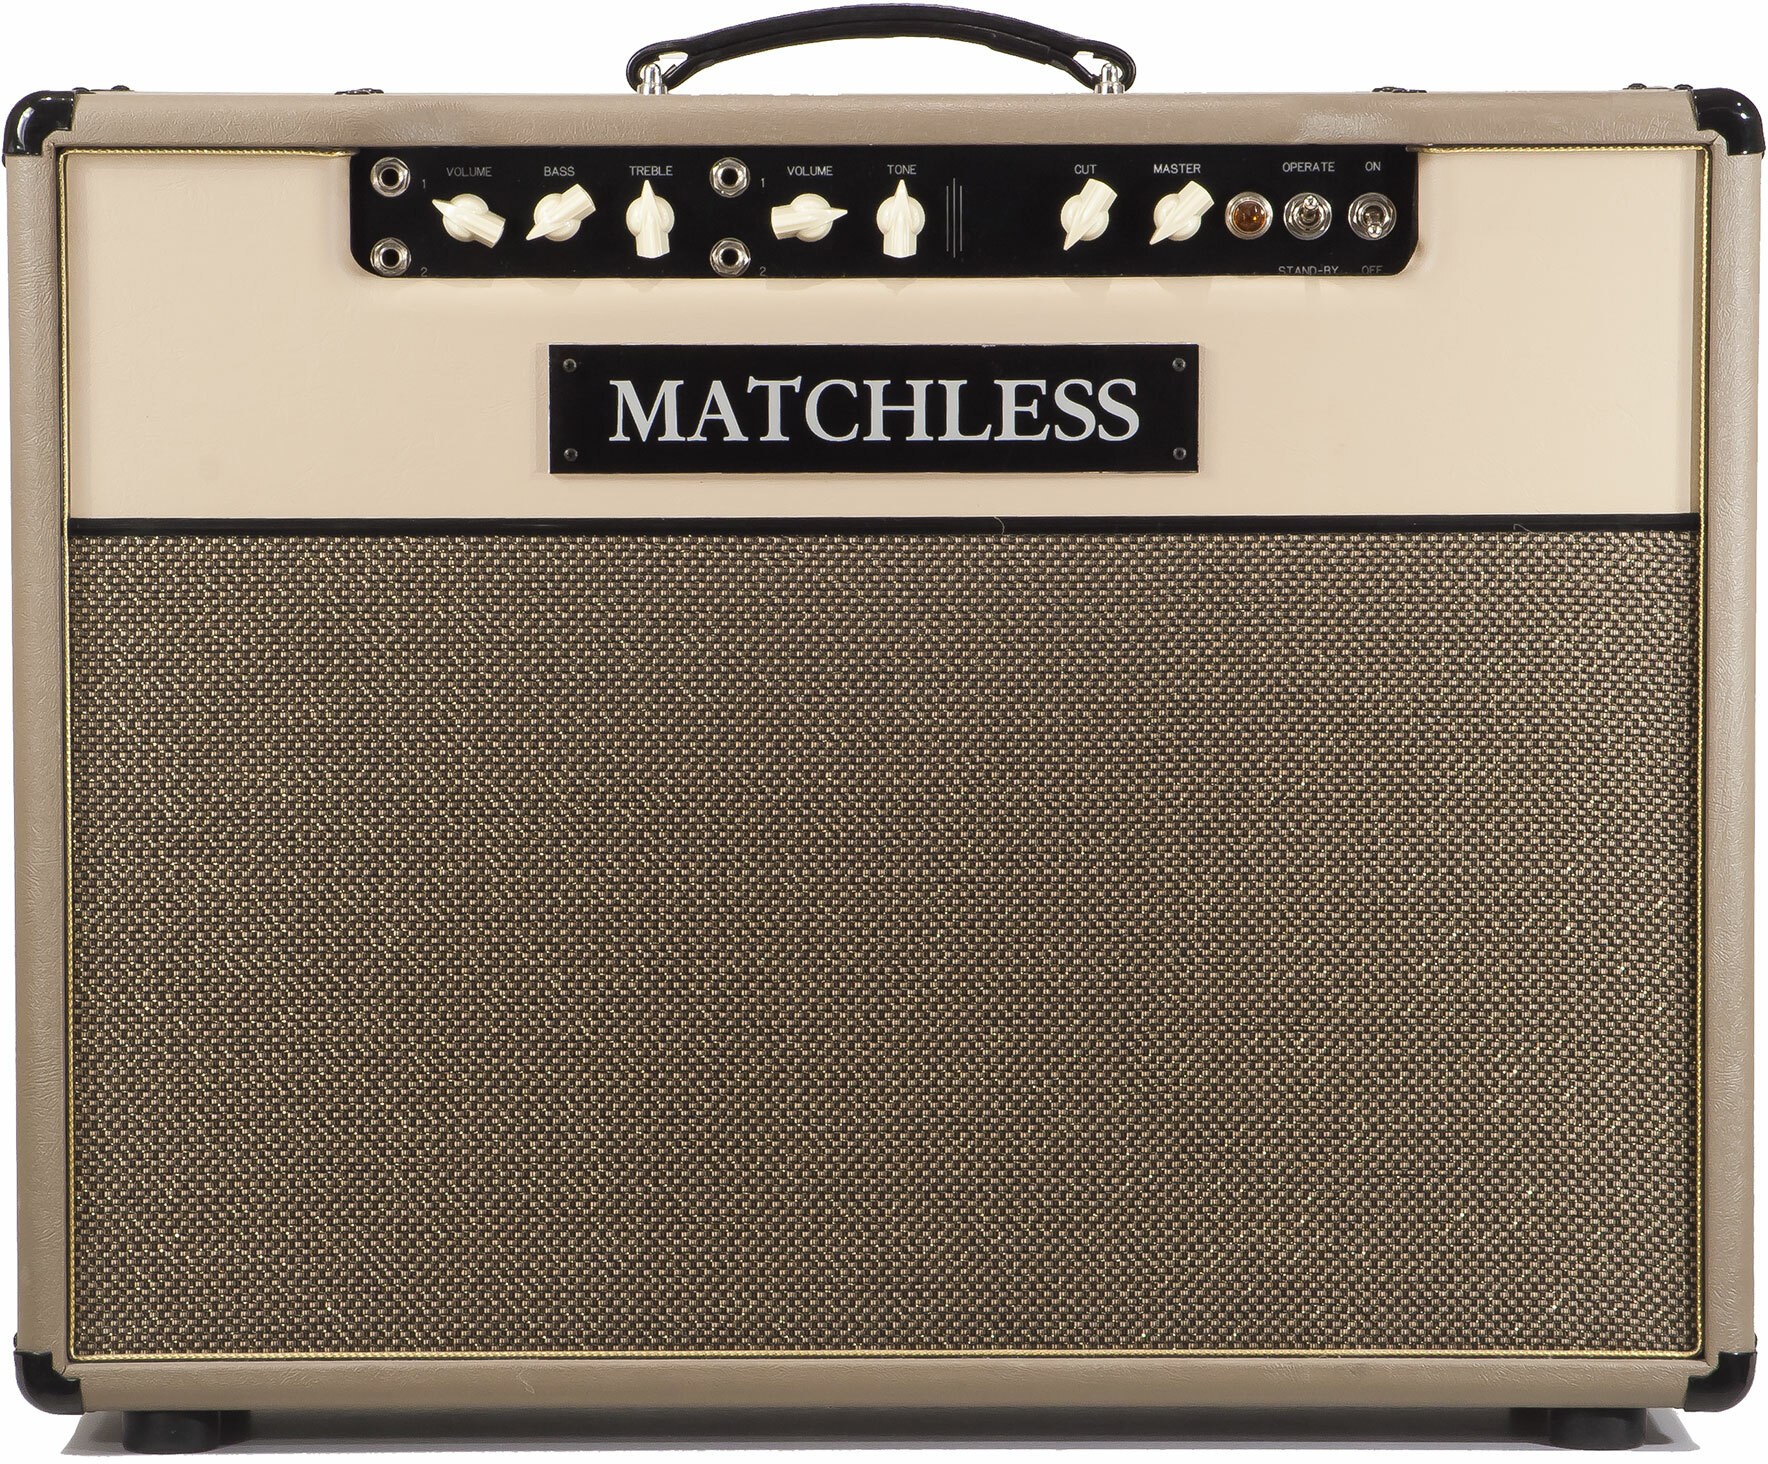 Matchless Dc-30 30w 2x12 Cappuccino/gold - Electric guitar combo amp - Main picture